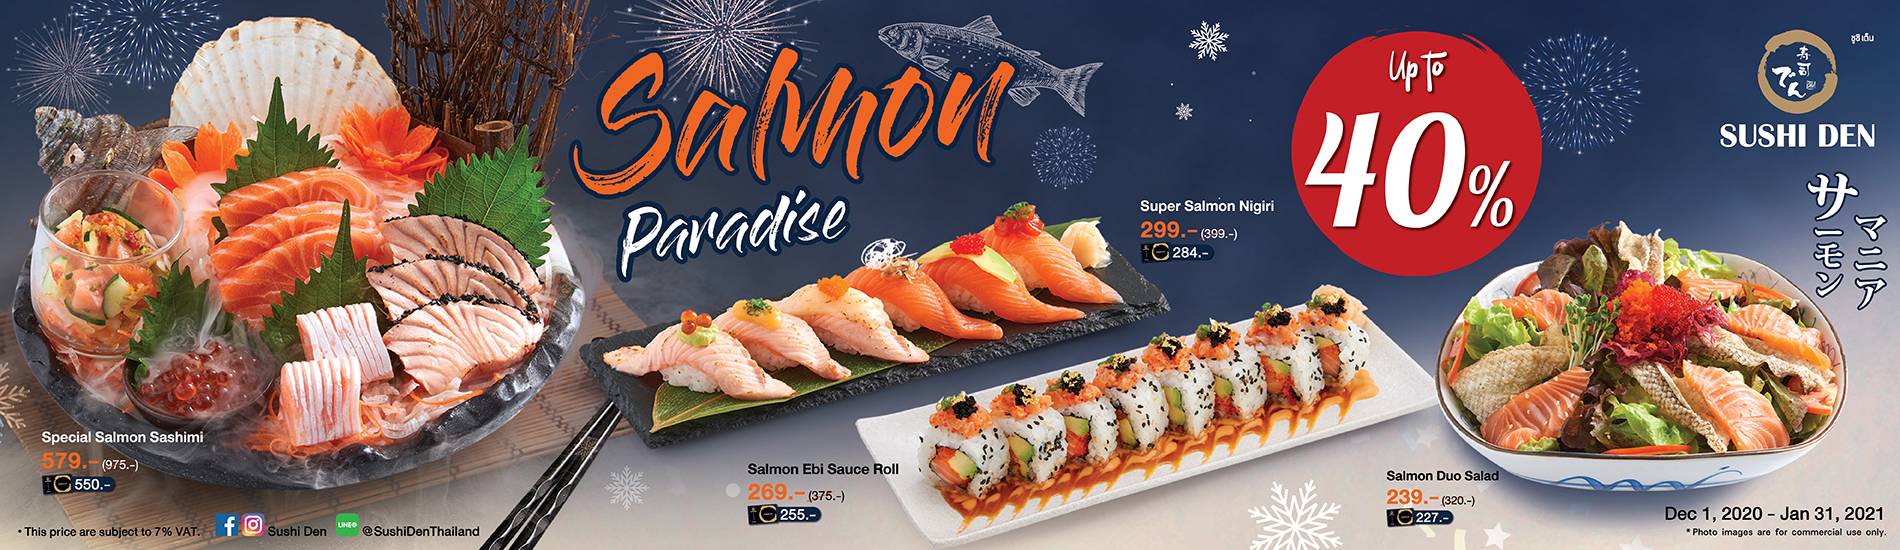 A New Promotion: Salmon Paradise at Sushi Den